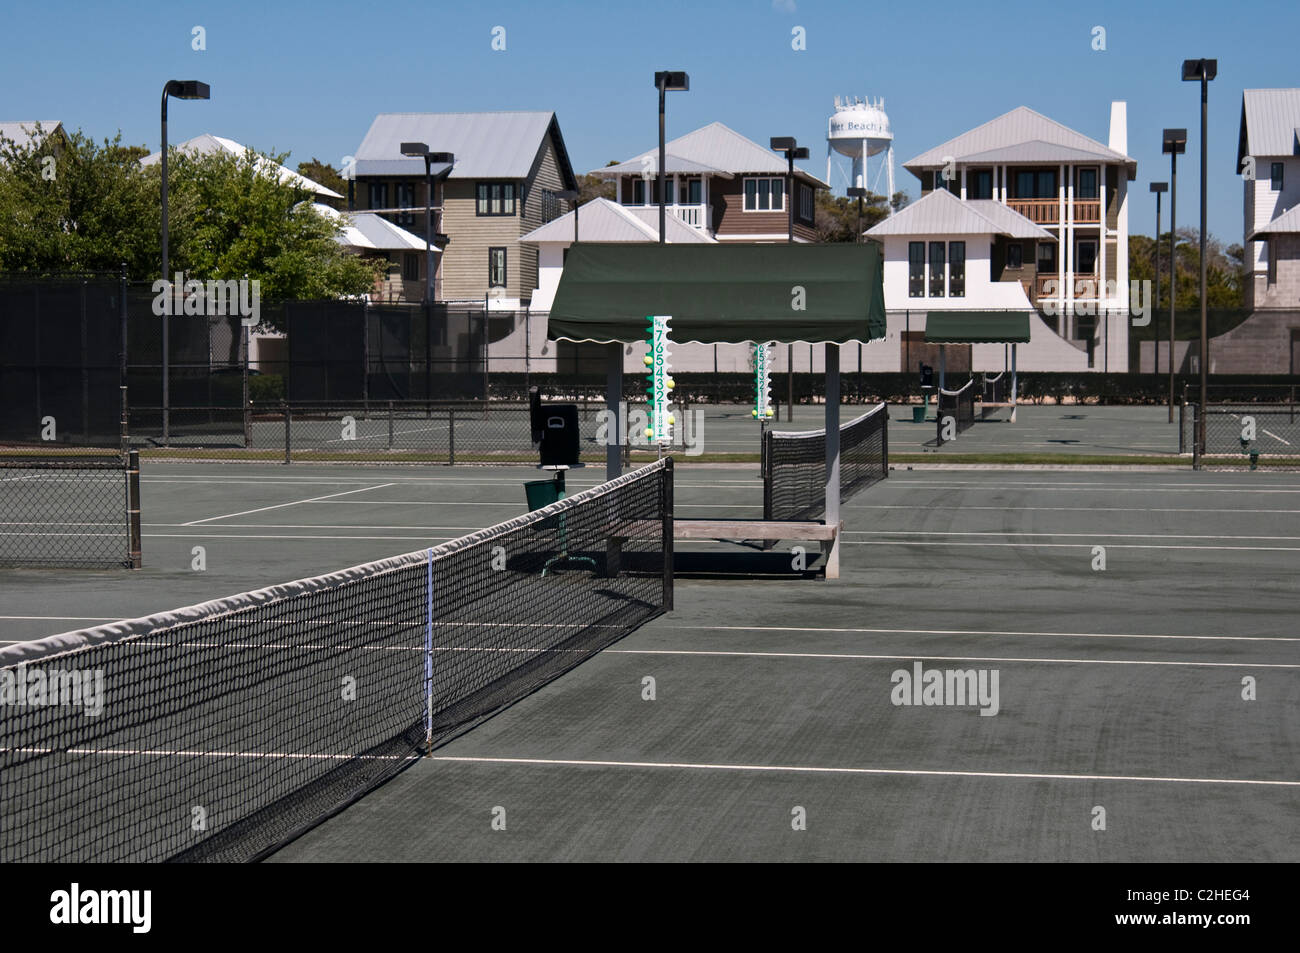 The tennis courts at Rosemary Beach, Florida, USA. Stock Photo